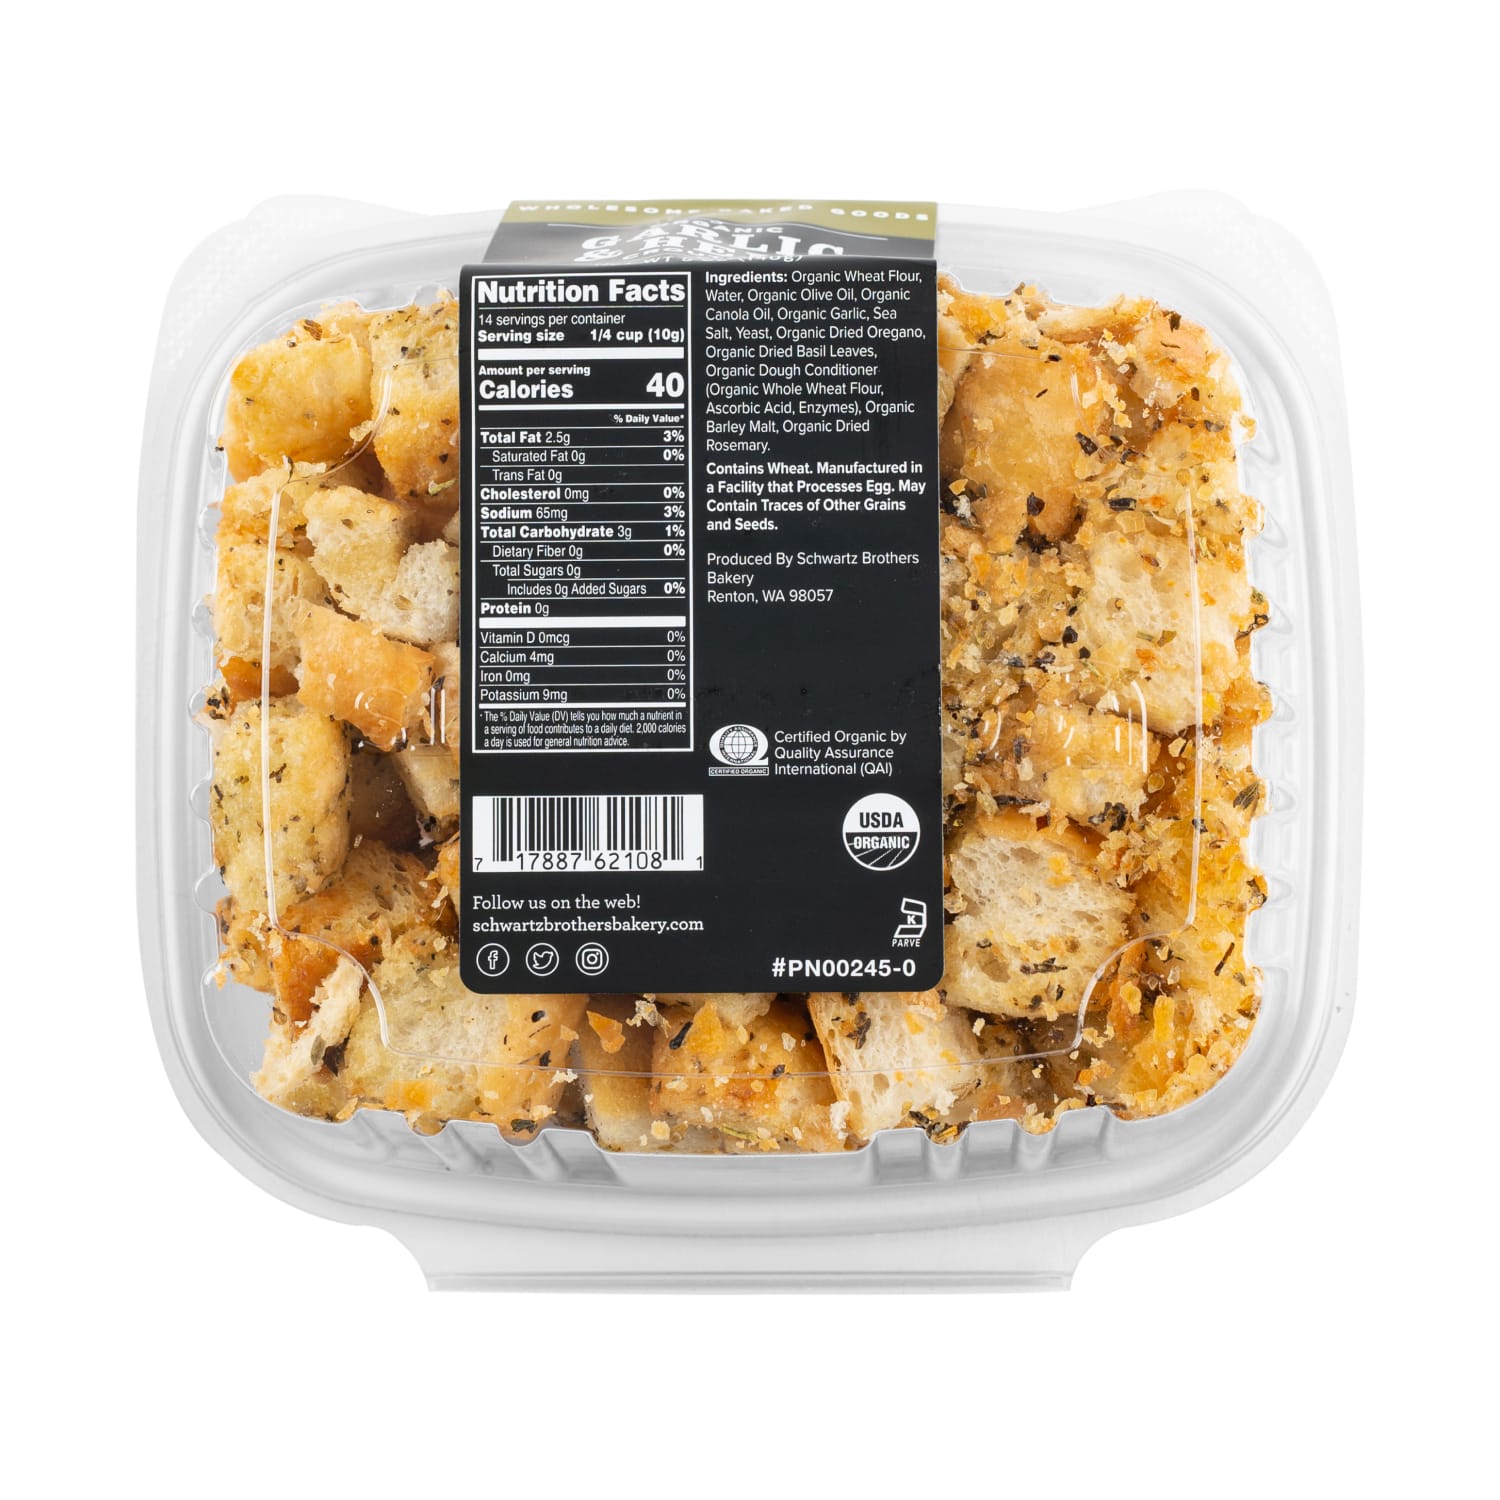 Garlic and Herb Croutons back label